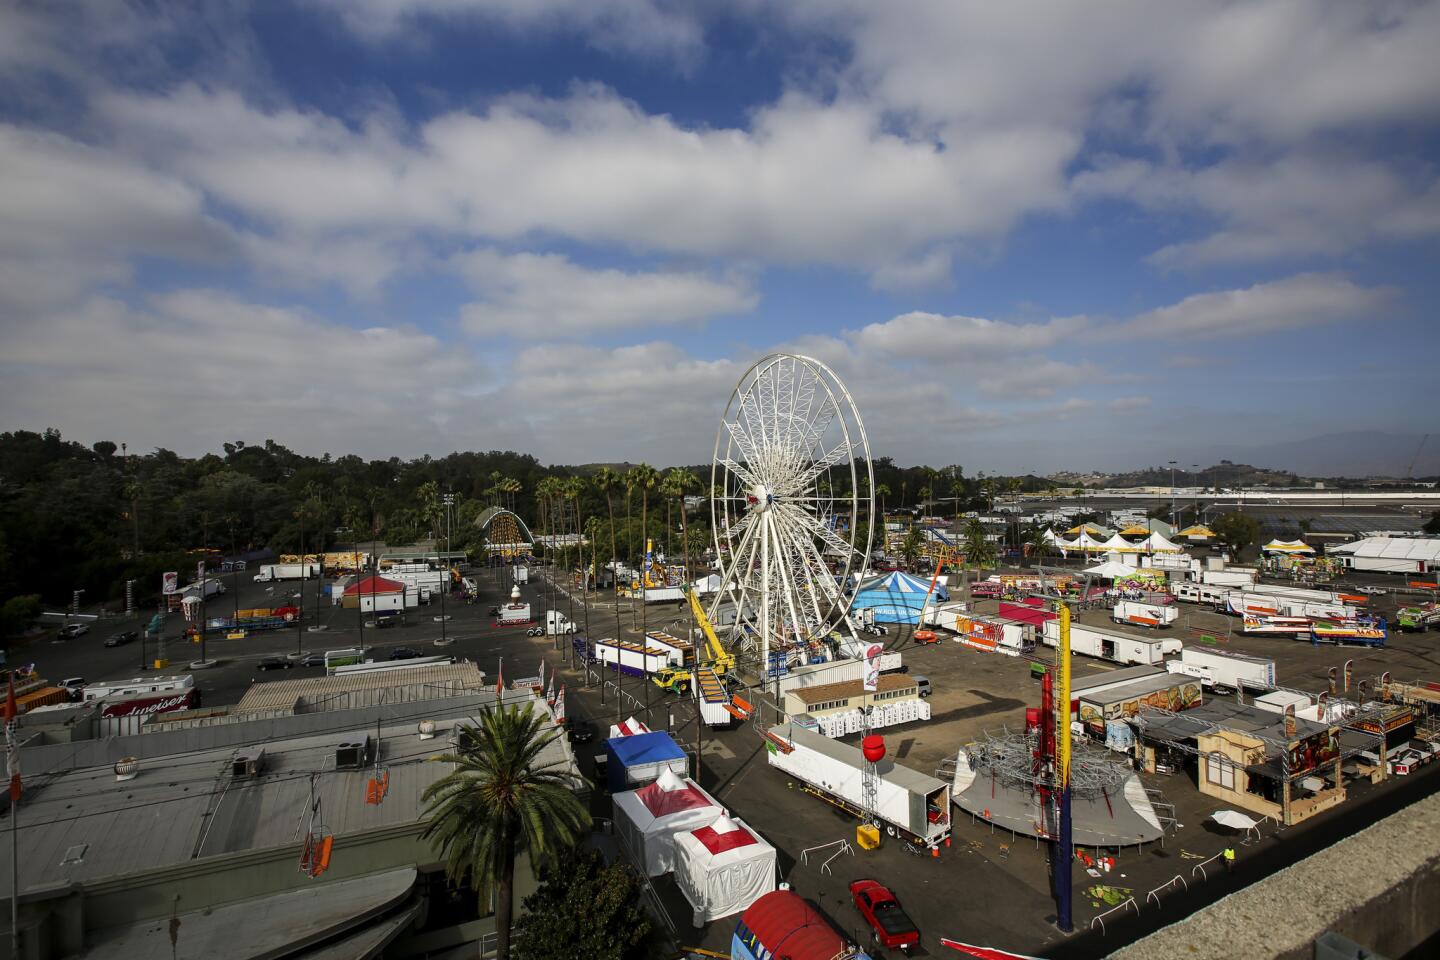 A view of the Fairplex as rides are being assembled in preparation for the opening of the L.A. County Fair in Pomona in September.